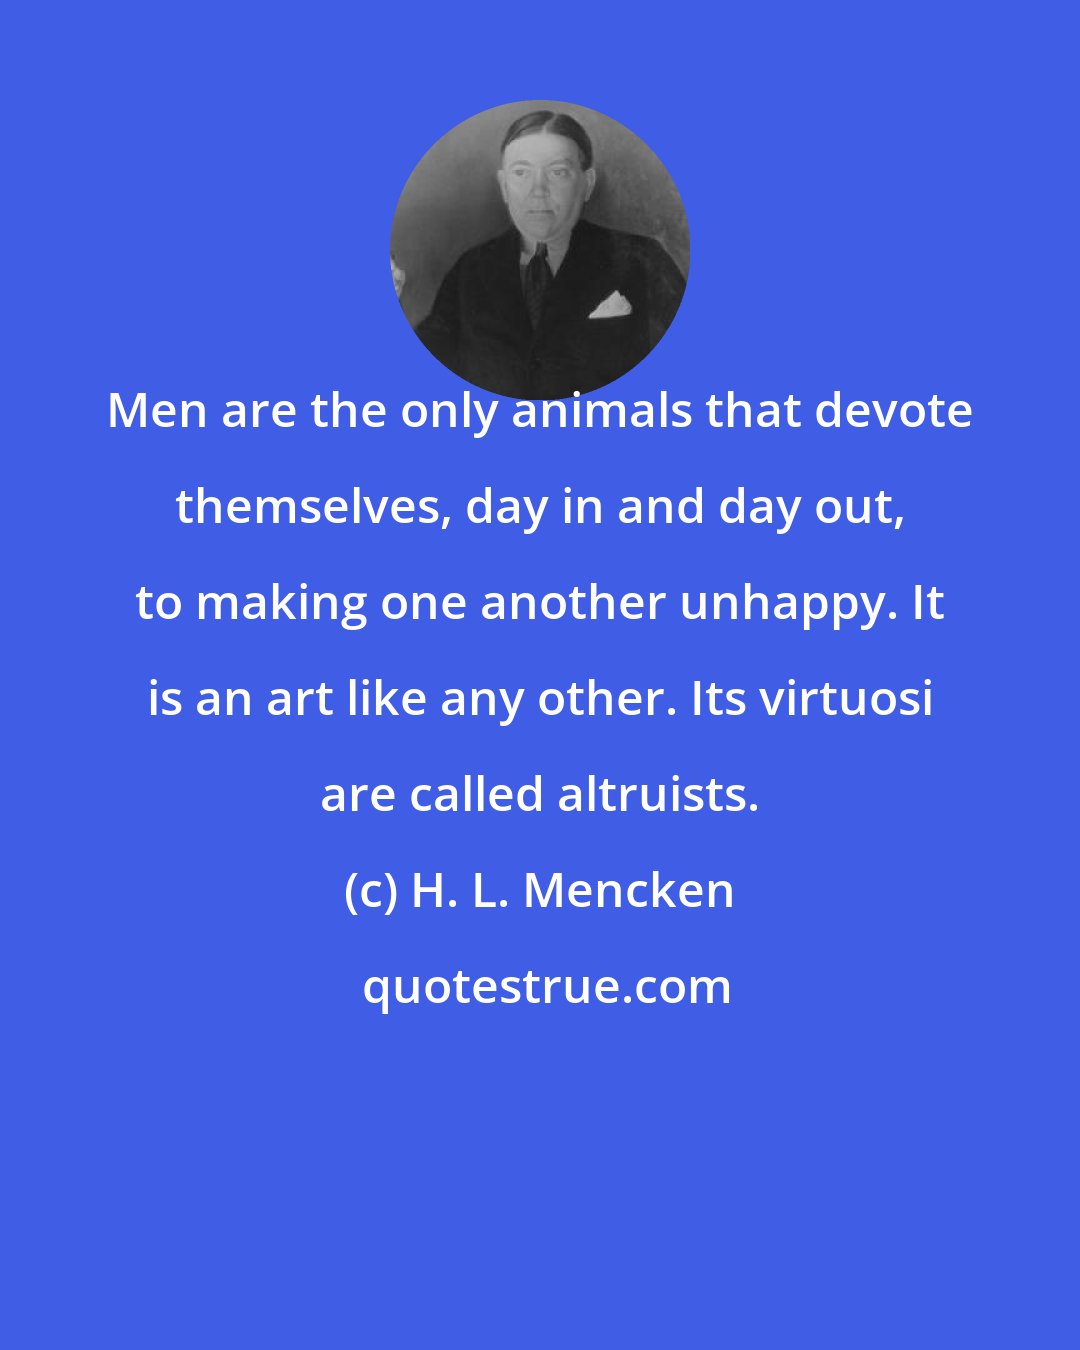 H. L. Mencken: Men are the only animals that devote themselves, day in and day out, to making one another unhappy. It is an art like any other. Its virtuosi are called altruists.